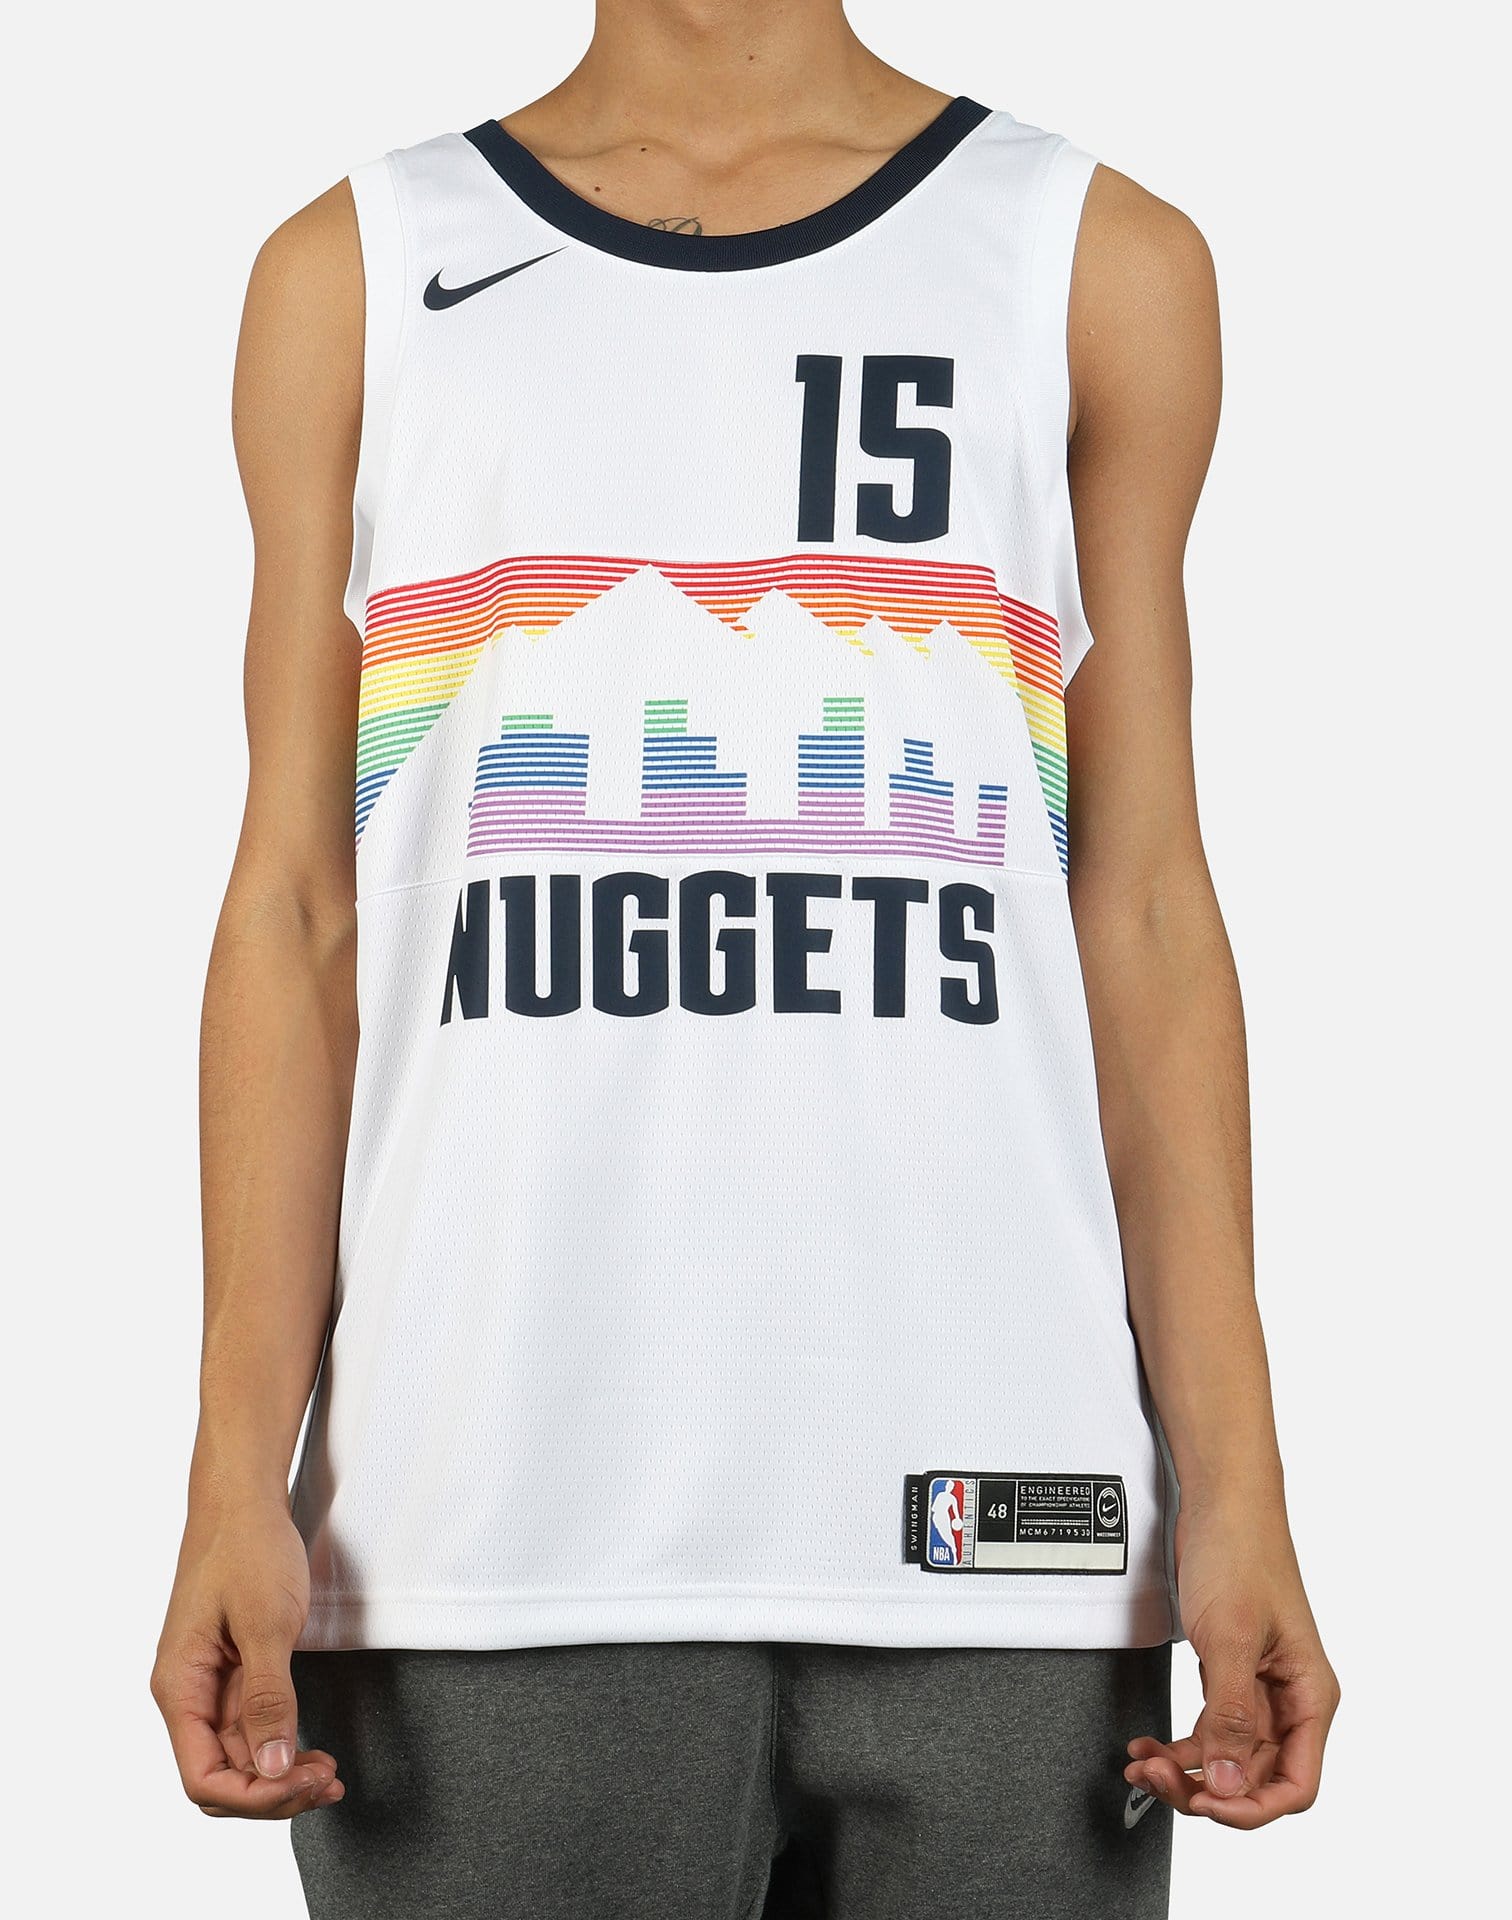 Denver Nuggets introduce new City Edition jersey